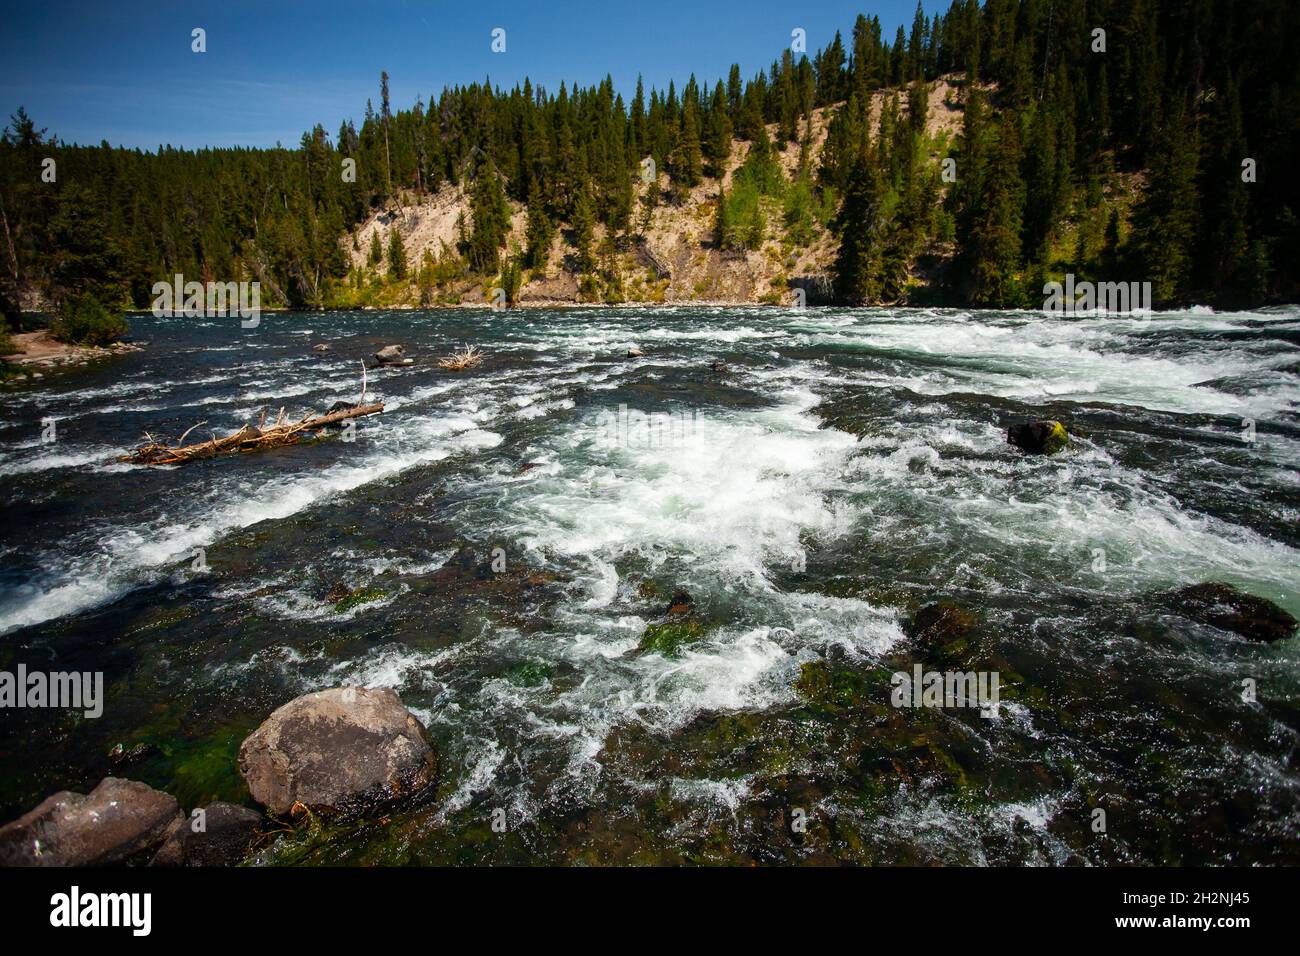 Rapid foamy river with coniferous forest on shore in background, focus on water foaming on stones and trunks, Swift river, Sunny day, blue sky, Beauty Stock Photo